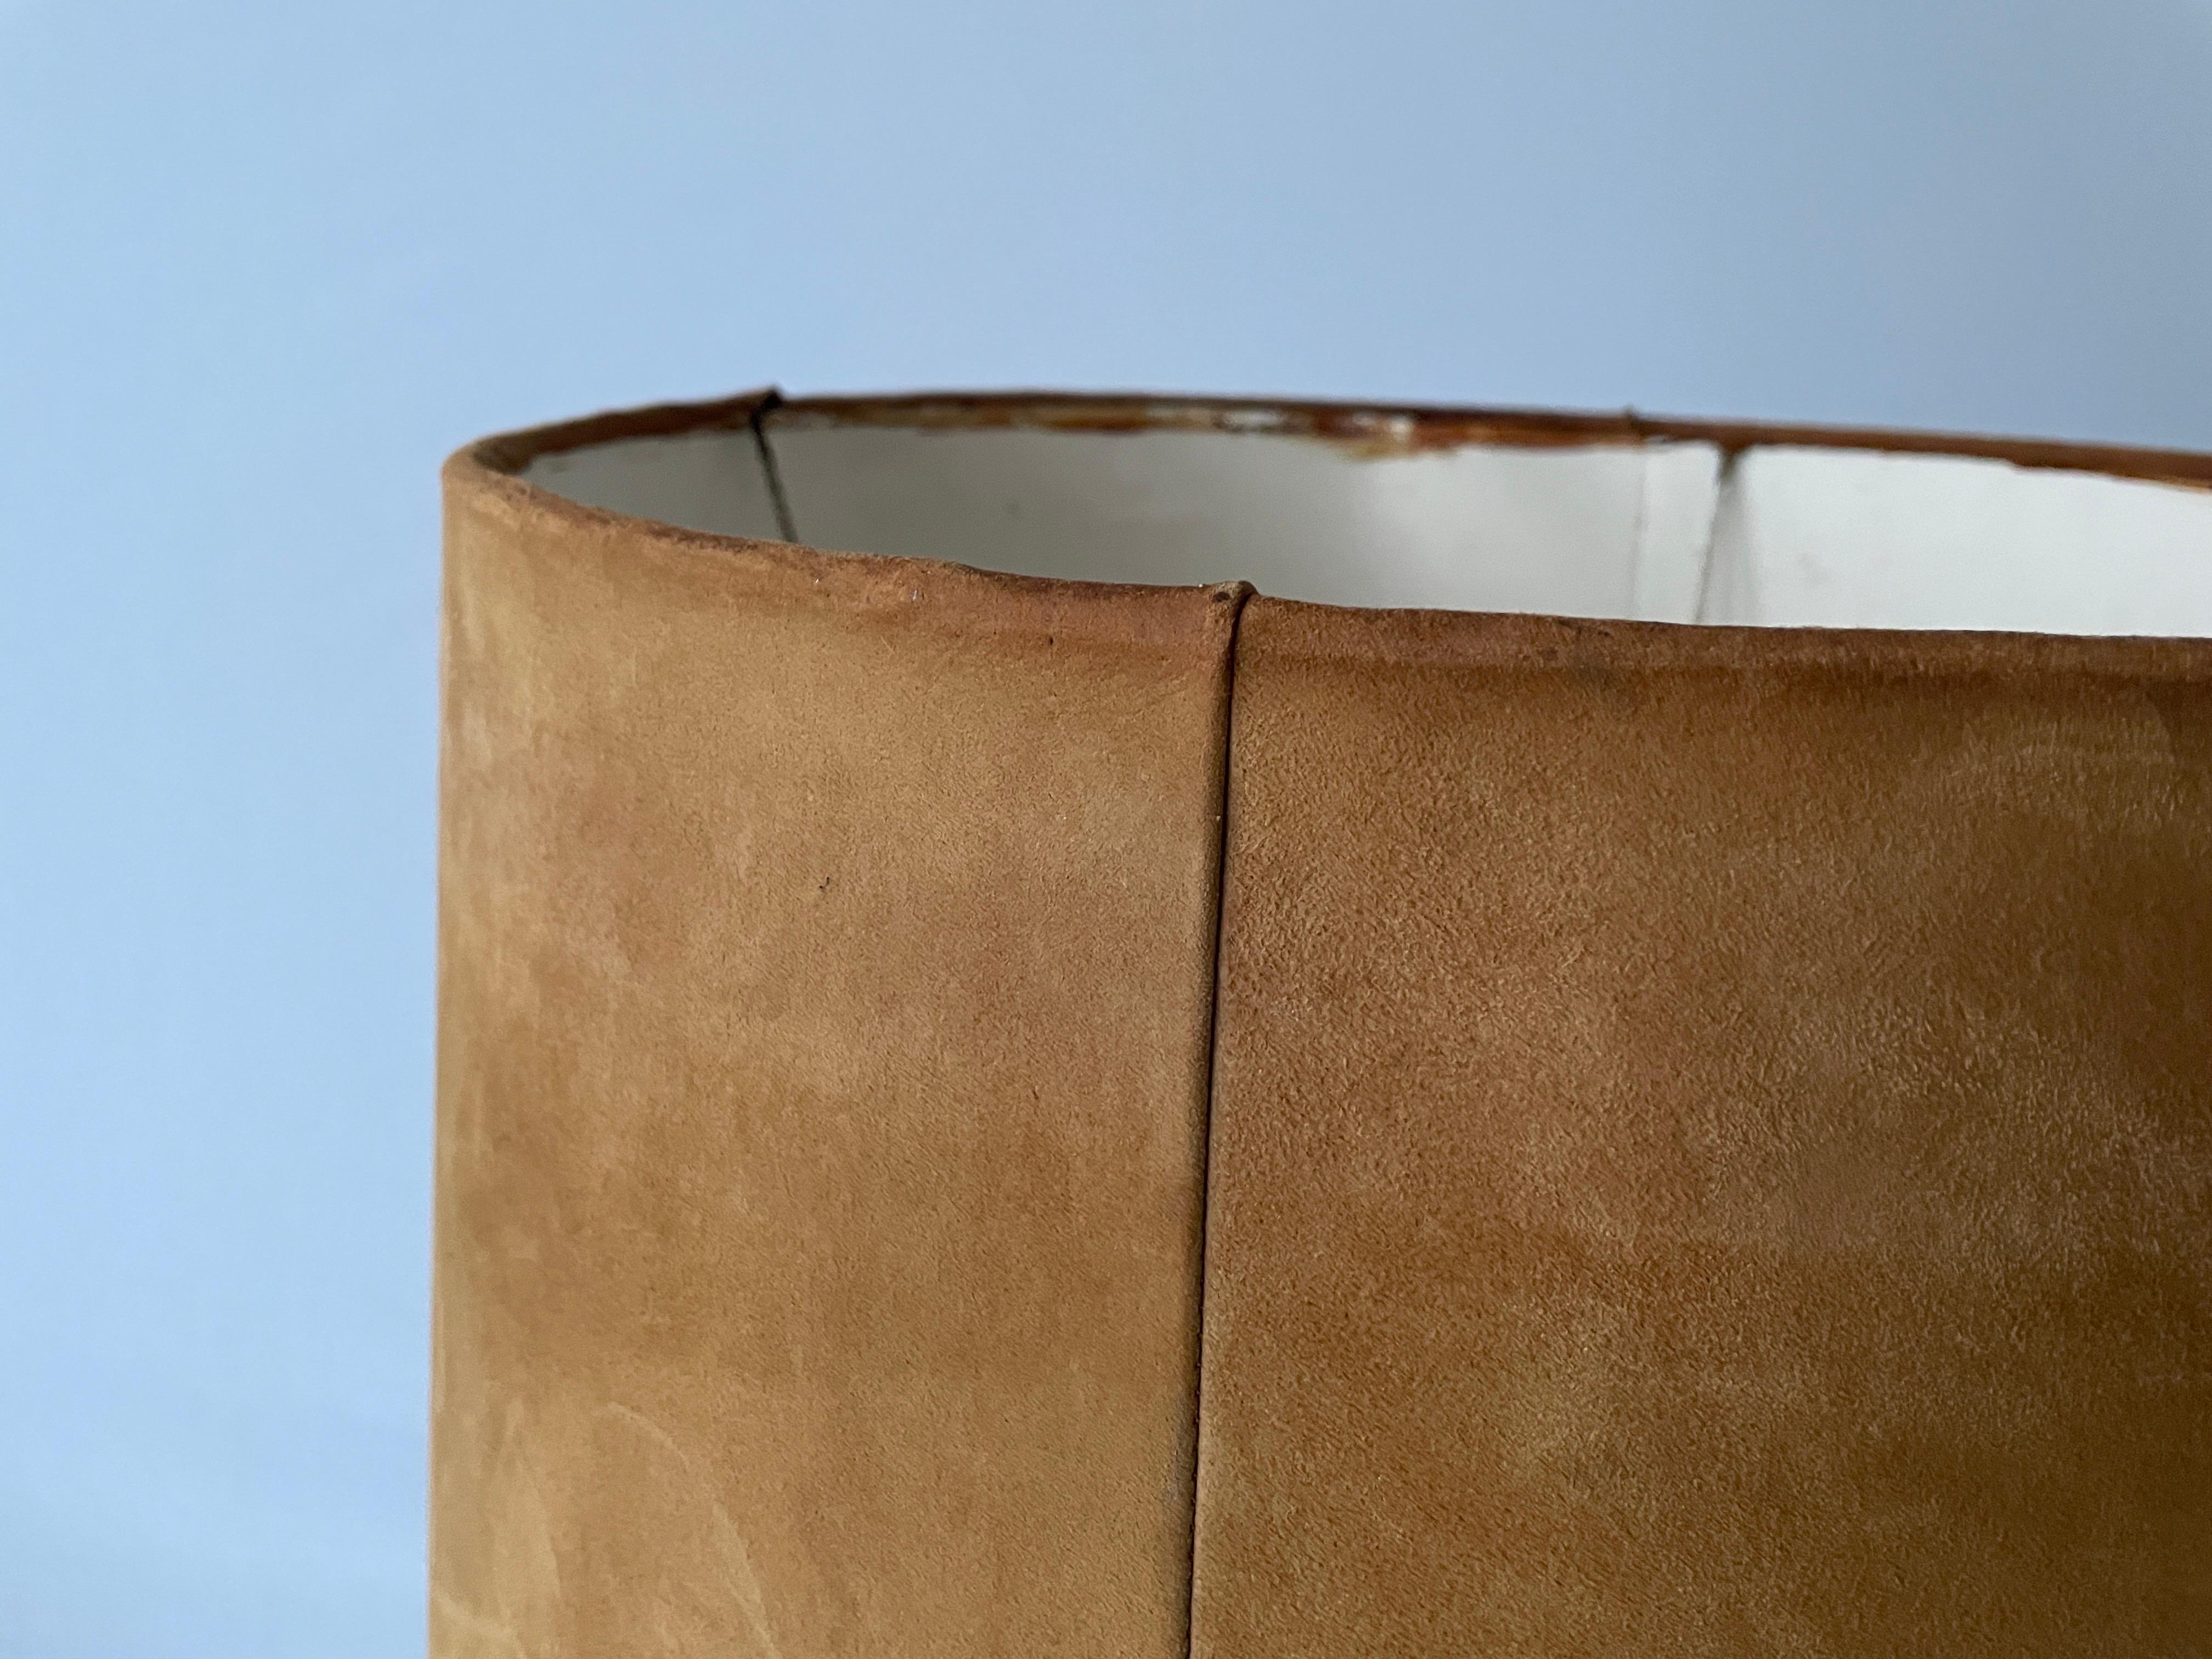 Mid-20th Century Tan Suede Leather and Glass Shade Floor or Table Lamp, 1960s, Denmark For Sale